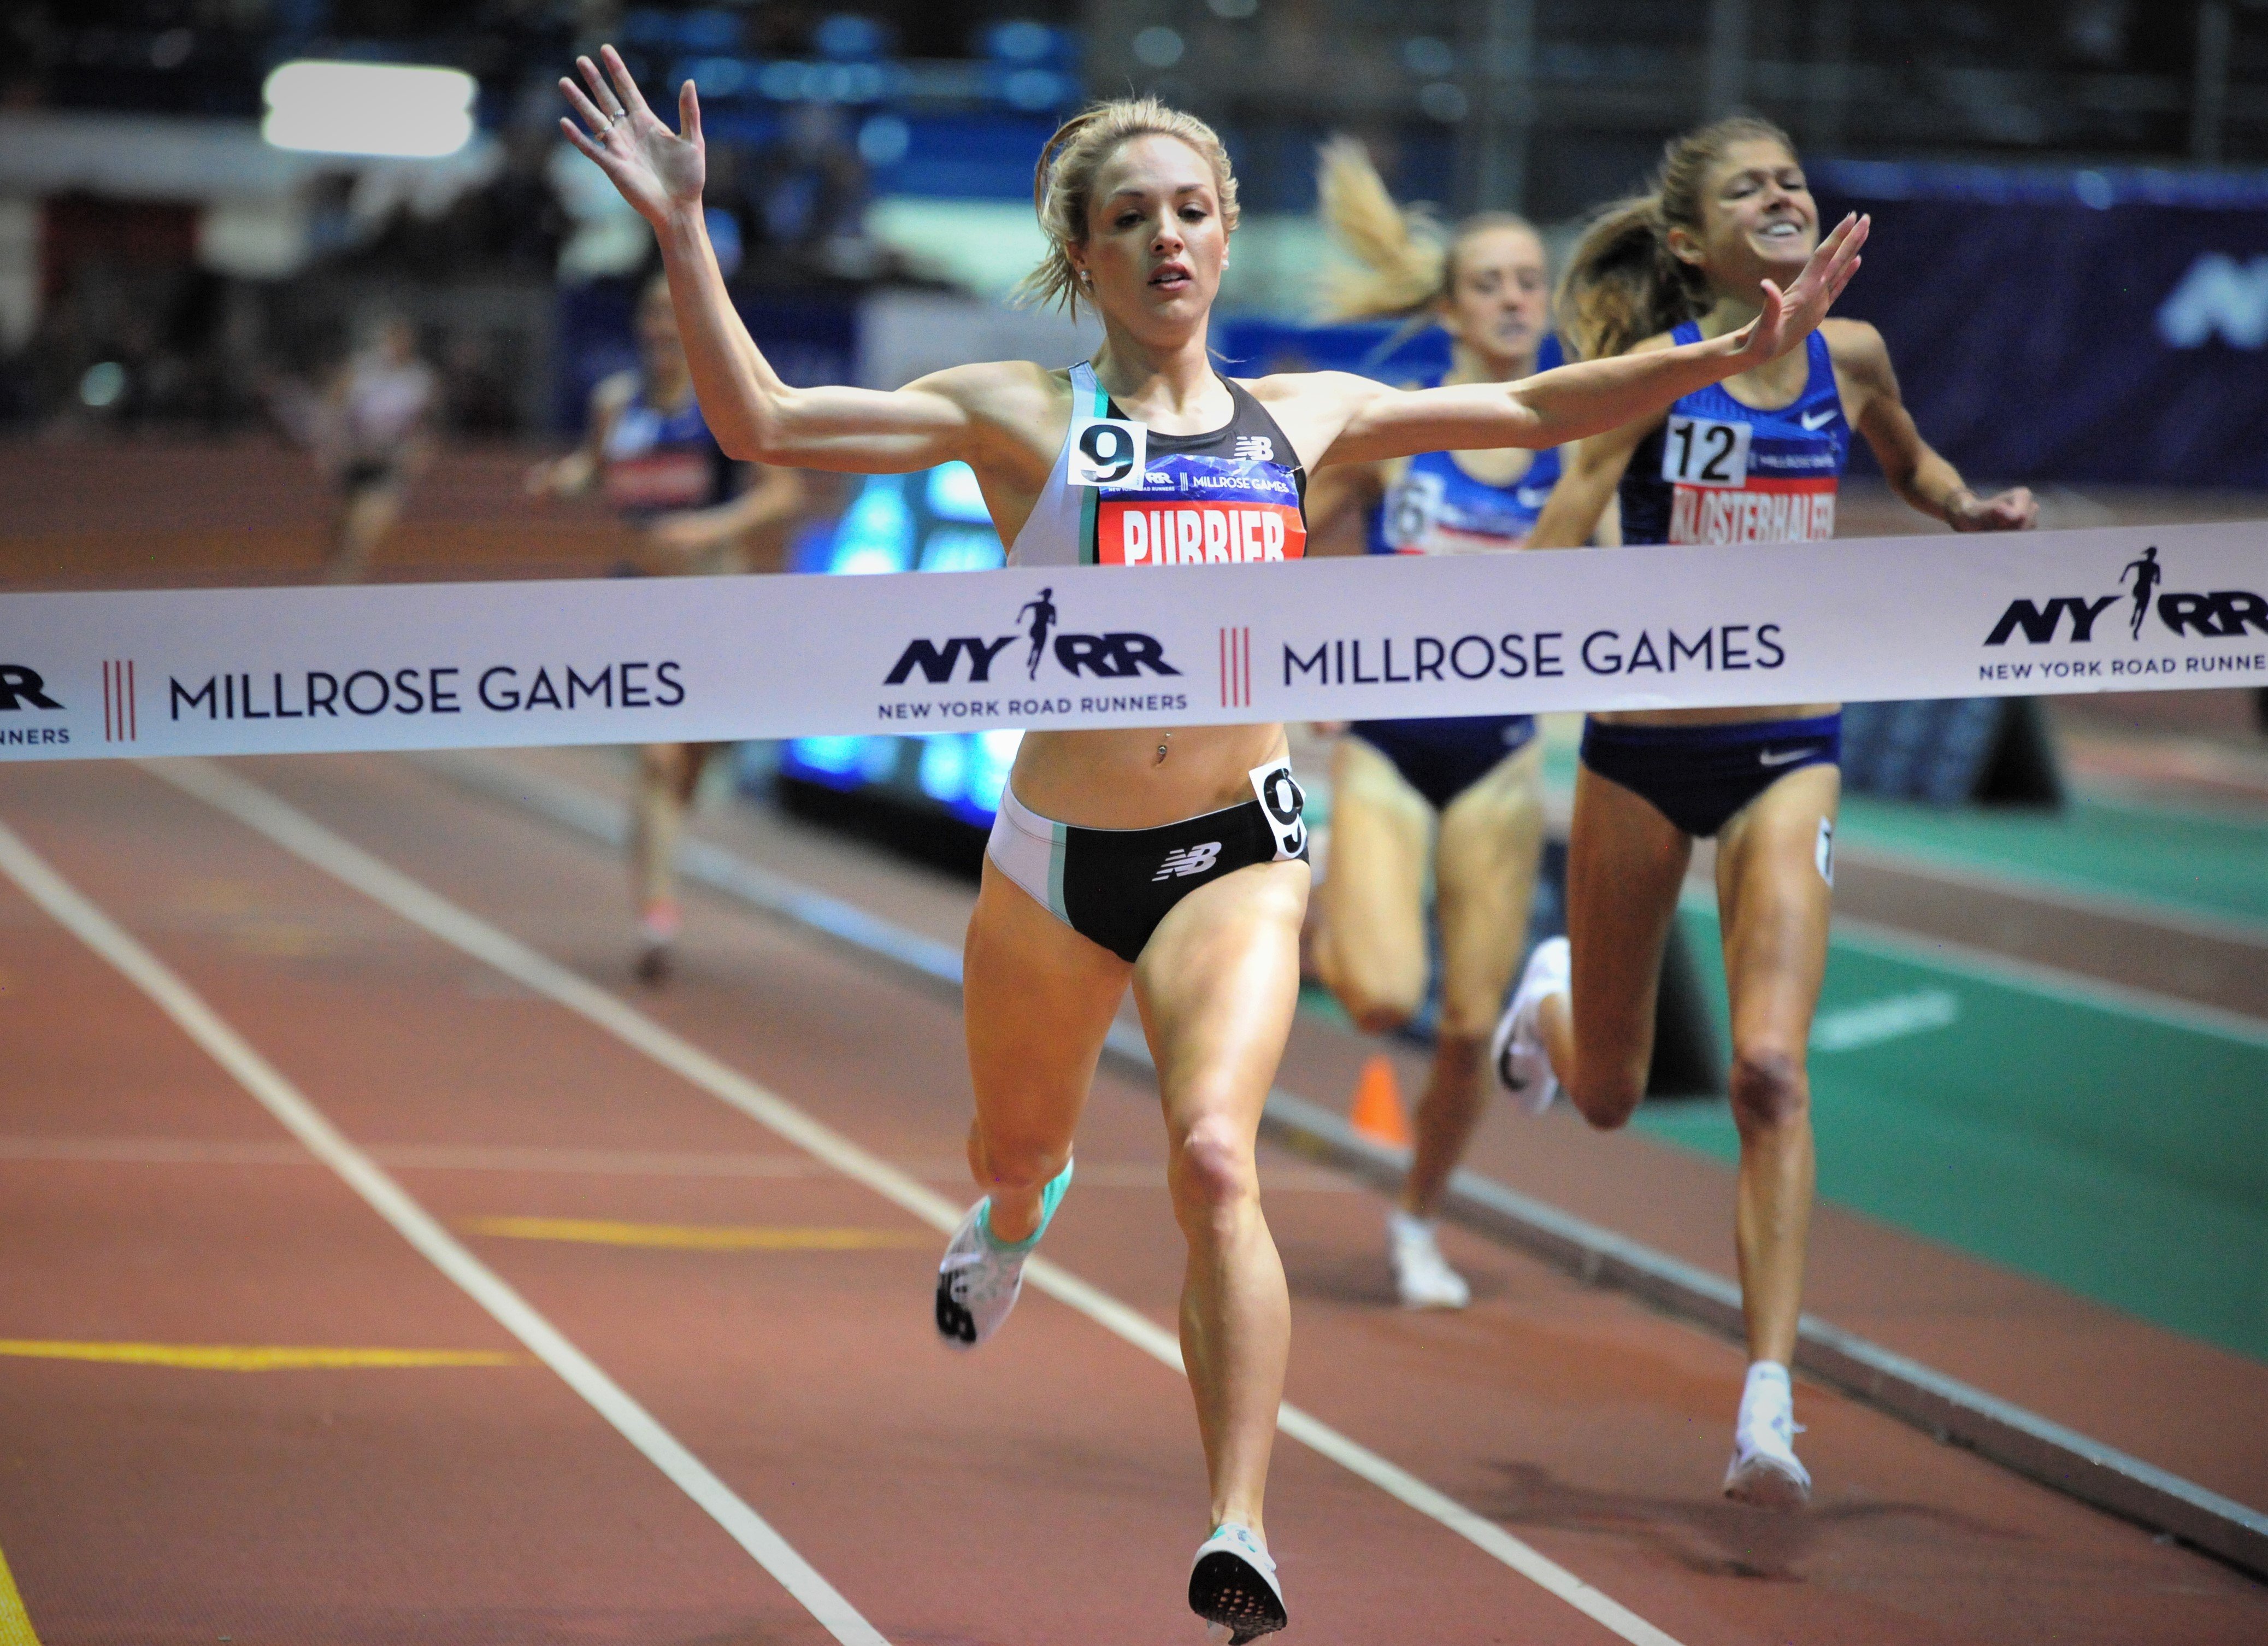 2022 Millrose Game Schedule and Results